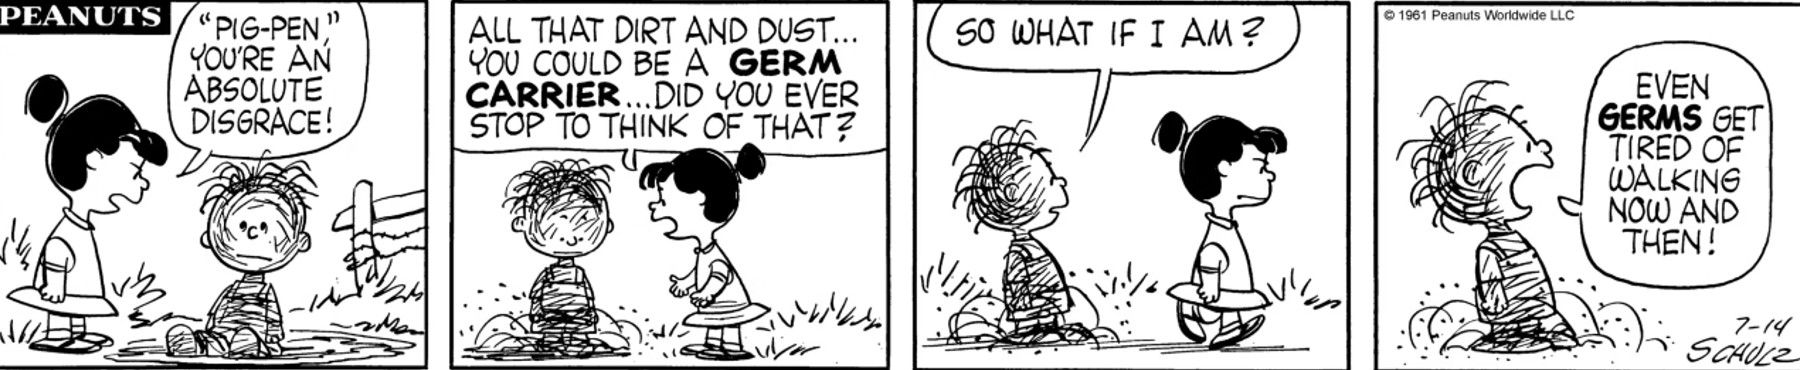 pig pen and lucy peanuts strip